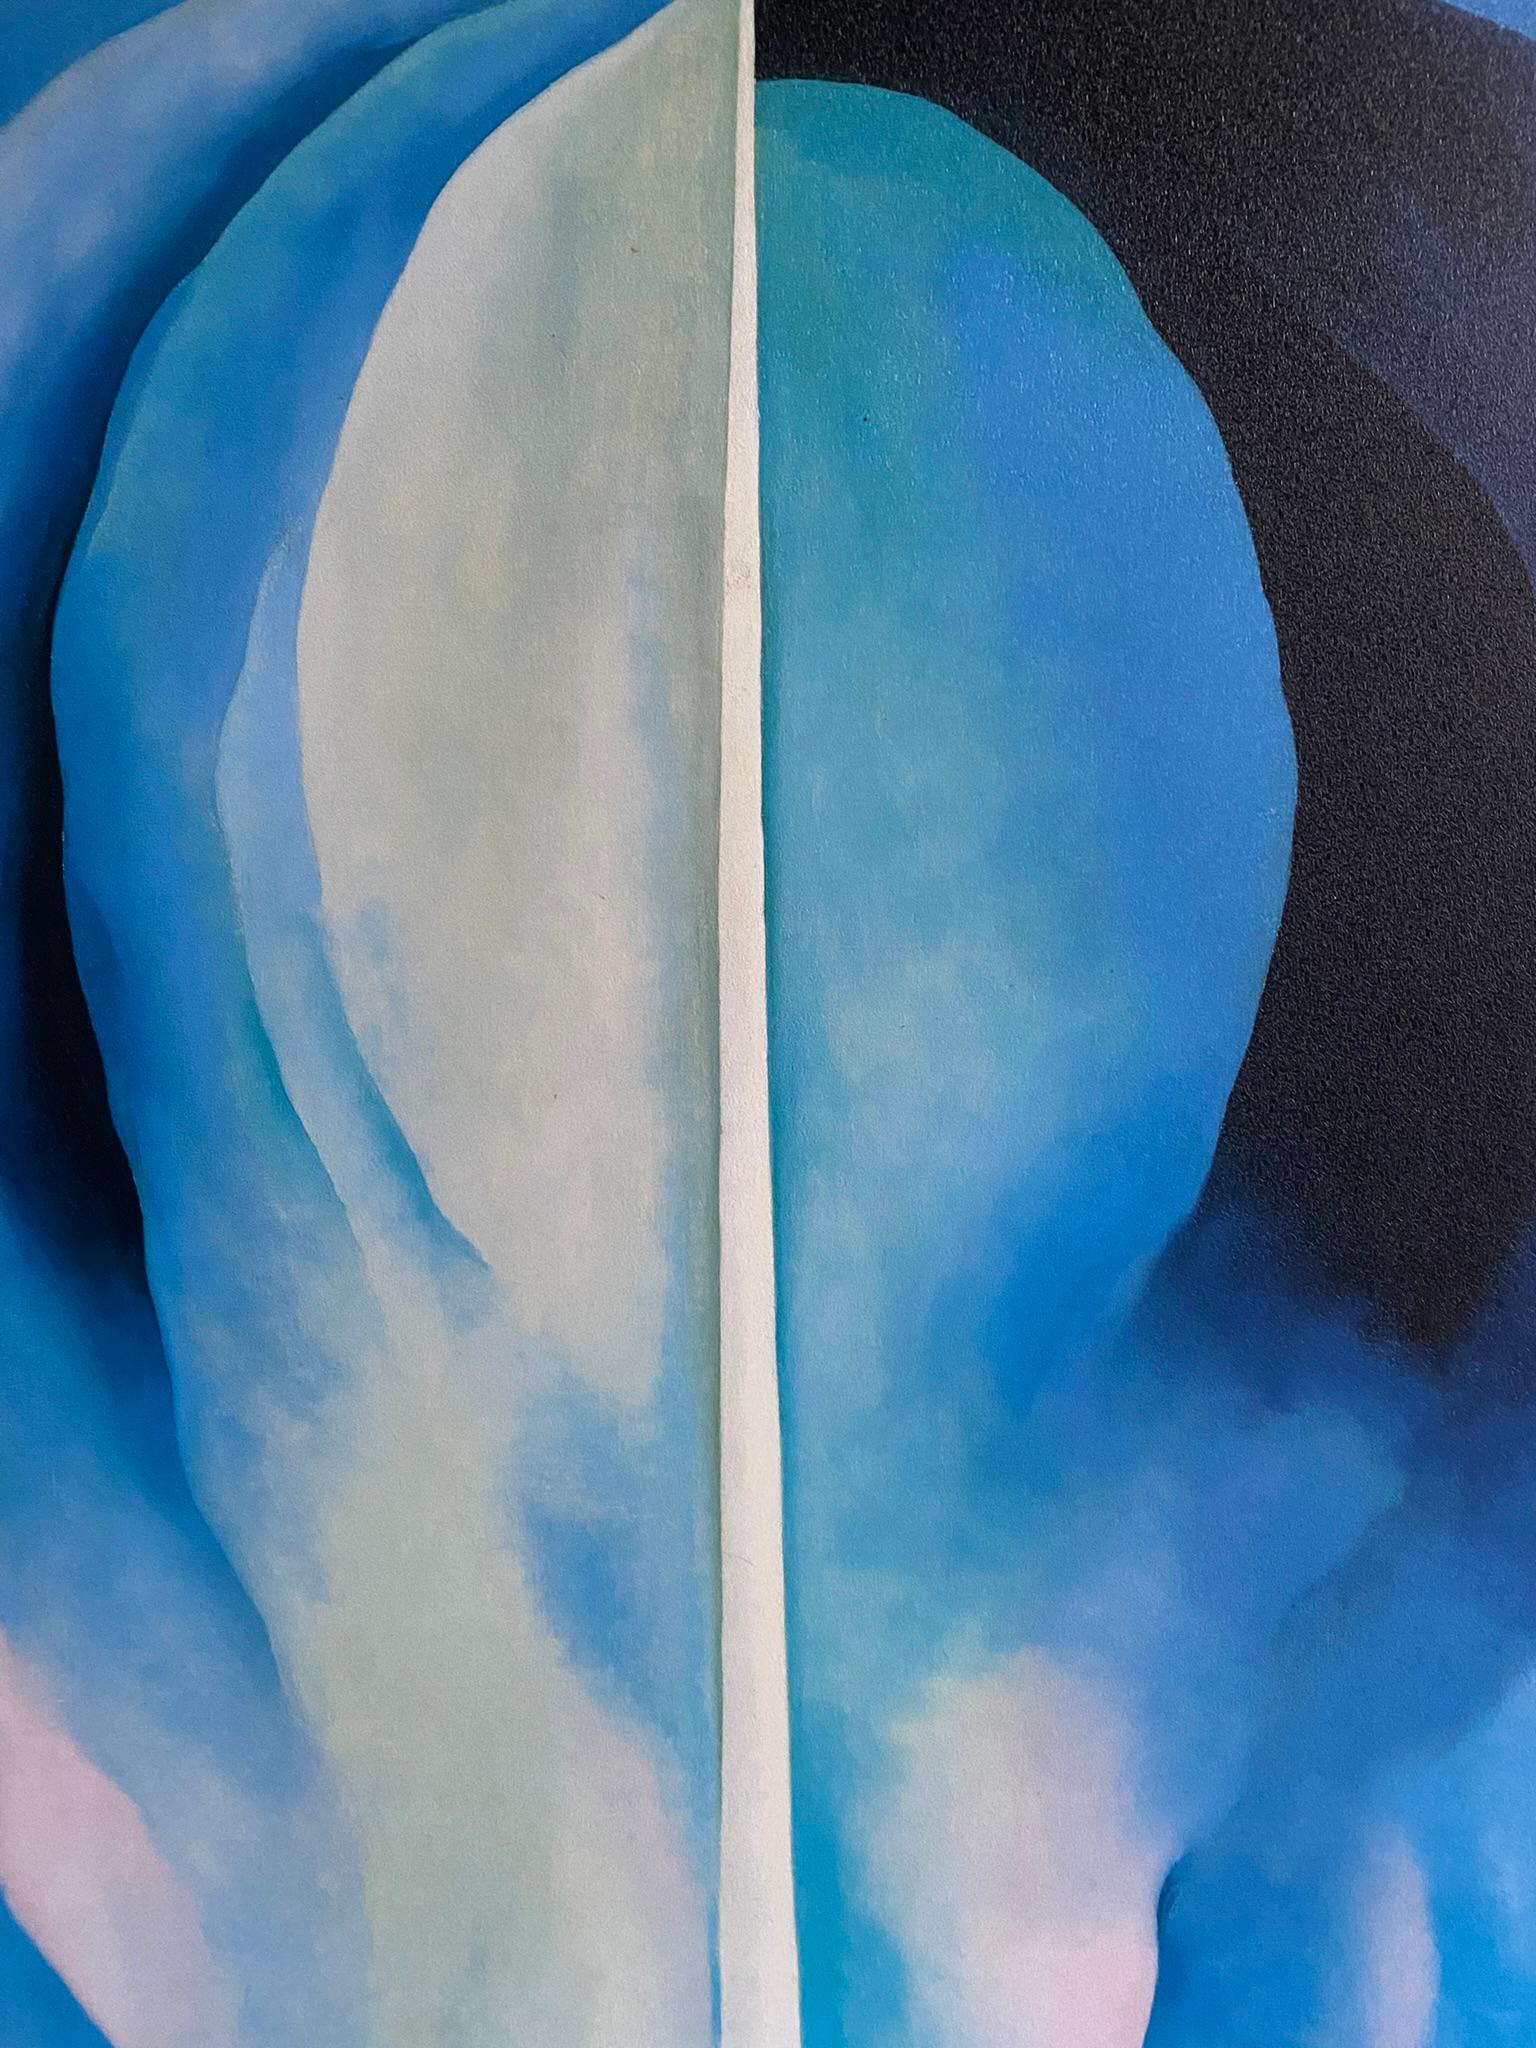 Georgia O'Keeffe-High Quality print by MoMA circa1997-Abstraction Blue-GSYStudio For Sale 3